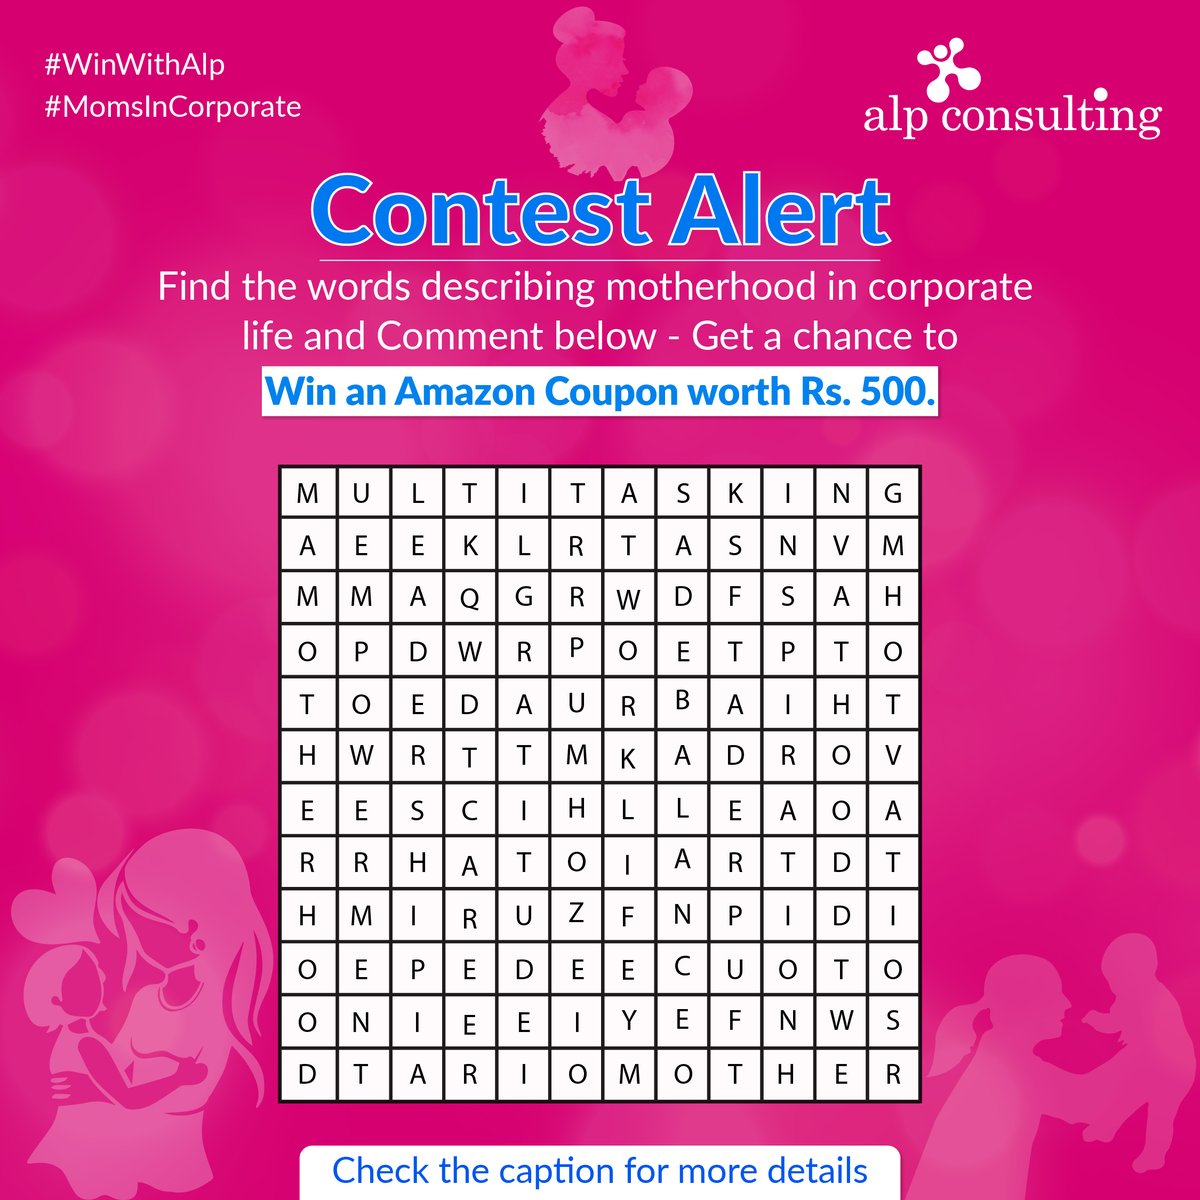 #ParticipateNow
All you have to do is -
1) Follow us on all social platforms
2) Share your answer in the comments and tag 3 frnds
3) Include the hashtag #MomsInCorporate
4) Last day - 20th May

#ContestAlert #ContestIndia #Contest #Mothersday #ALPConsulting #Giveaway #WinWithAlp